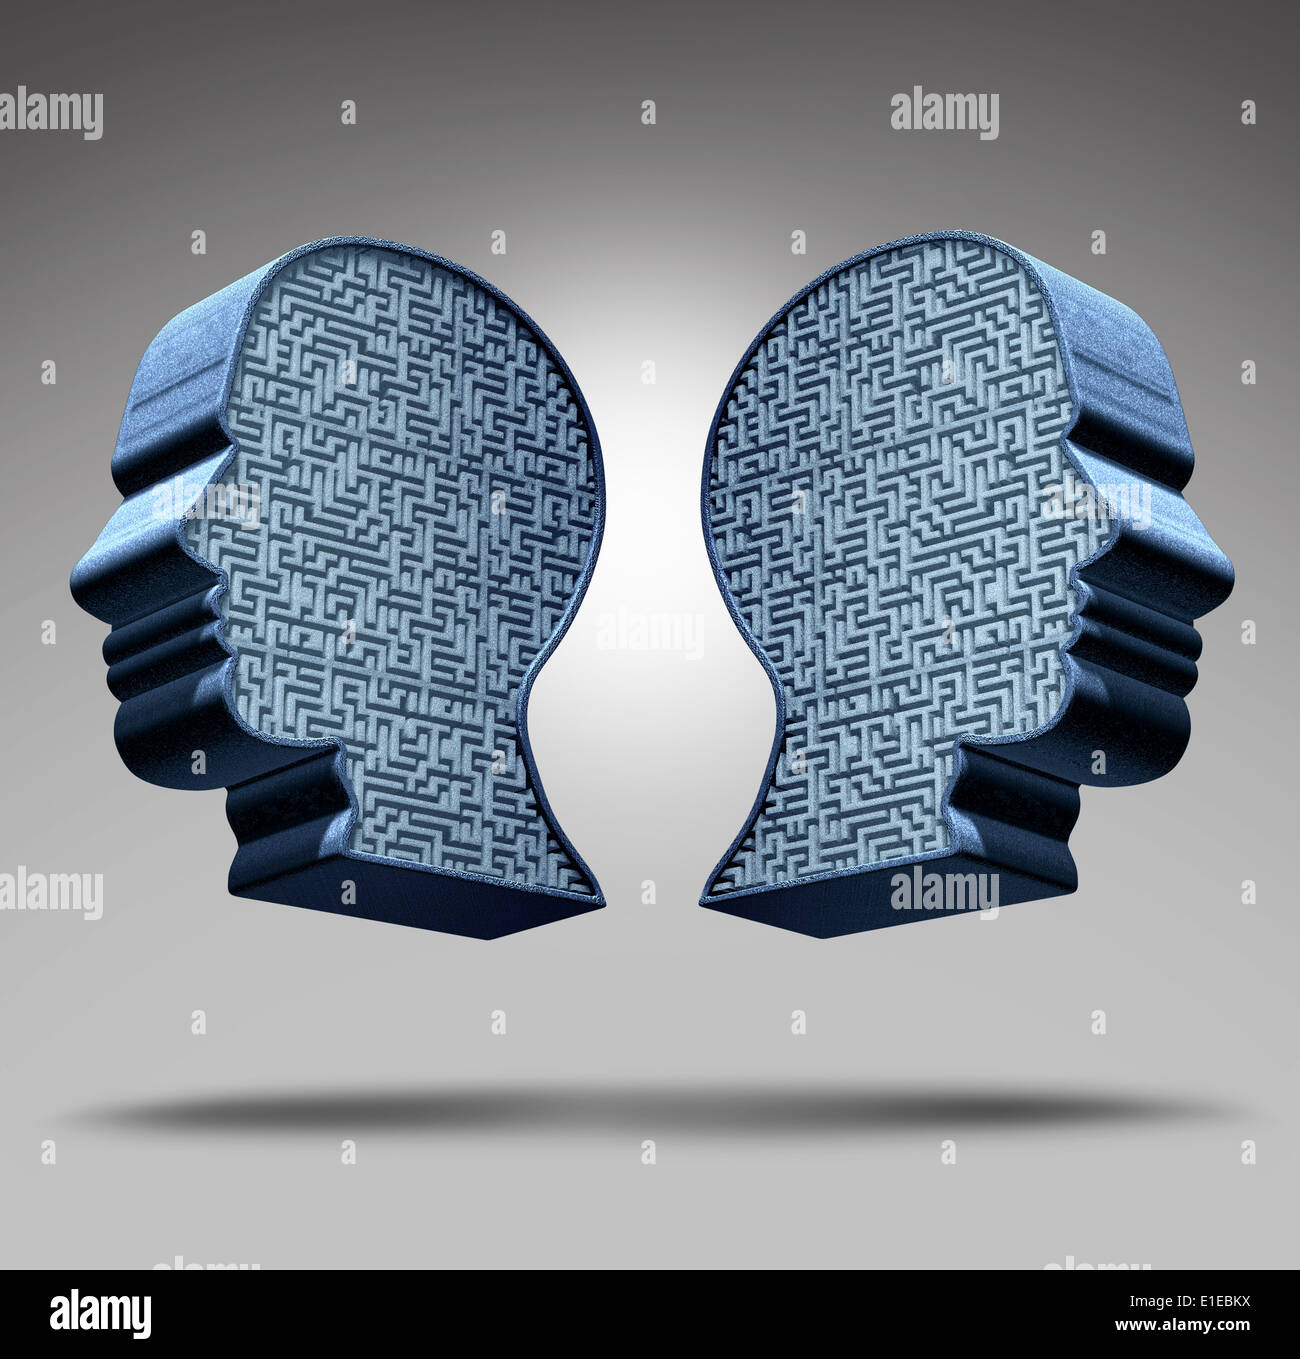 Bipolar disorder concept as a human head divided in two pieces with a maze or labyrinth inside as a mental health care symbol and medical psychological metaphor for the social behavior challenges of the disease. Stock Photo